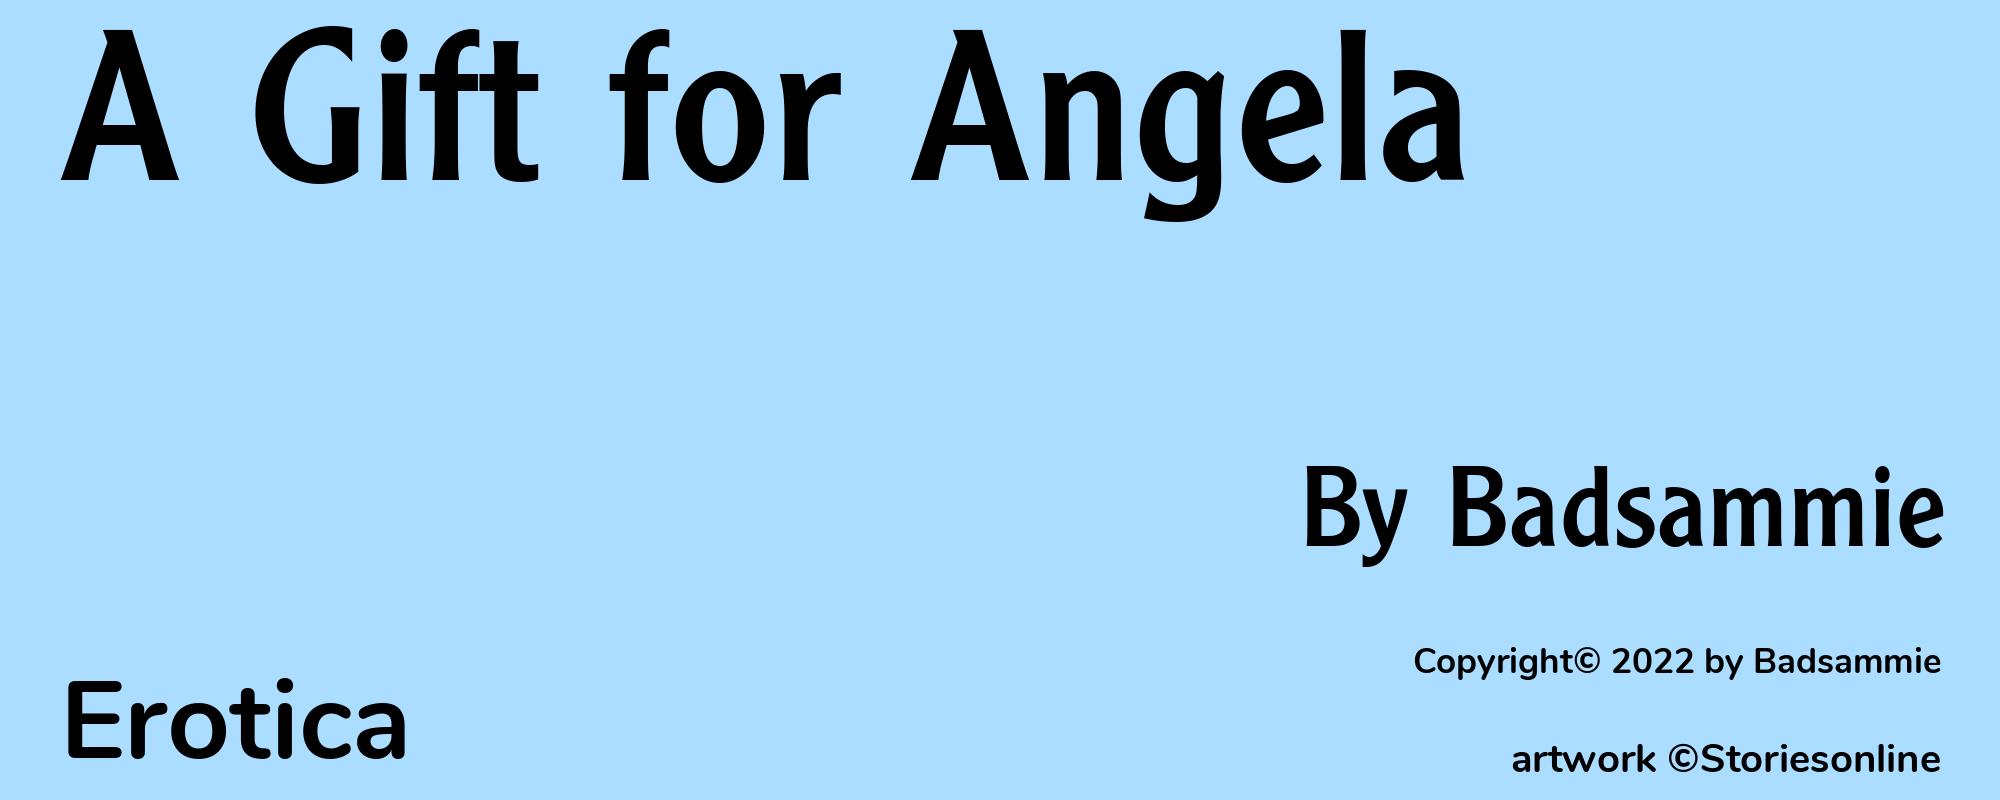 A Gift for Angela - Cover